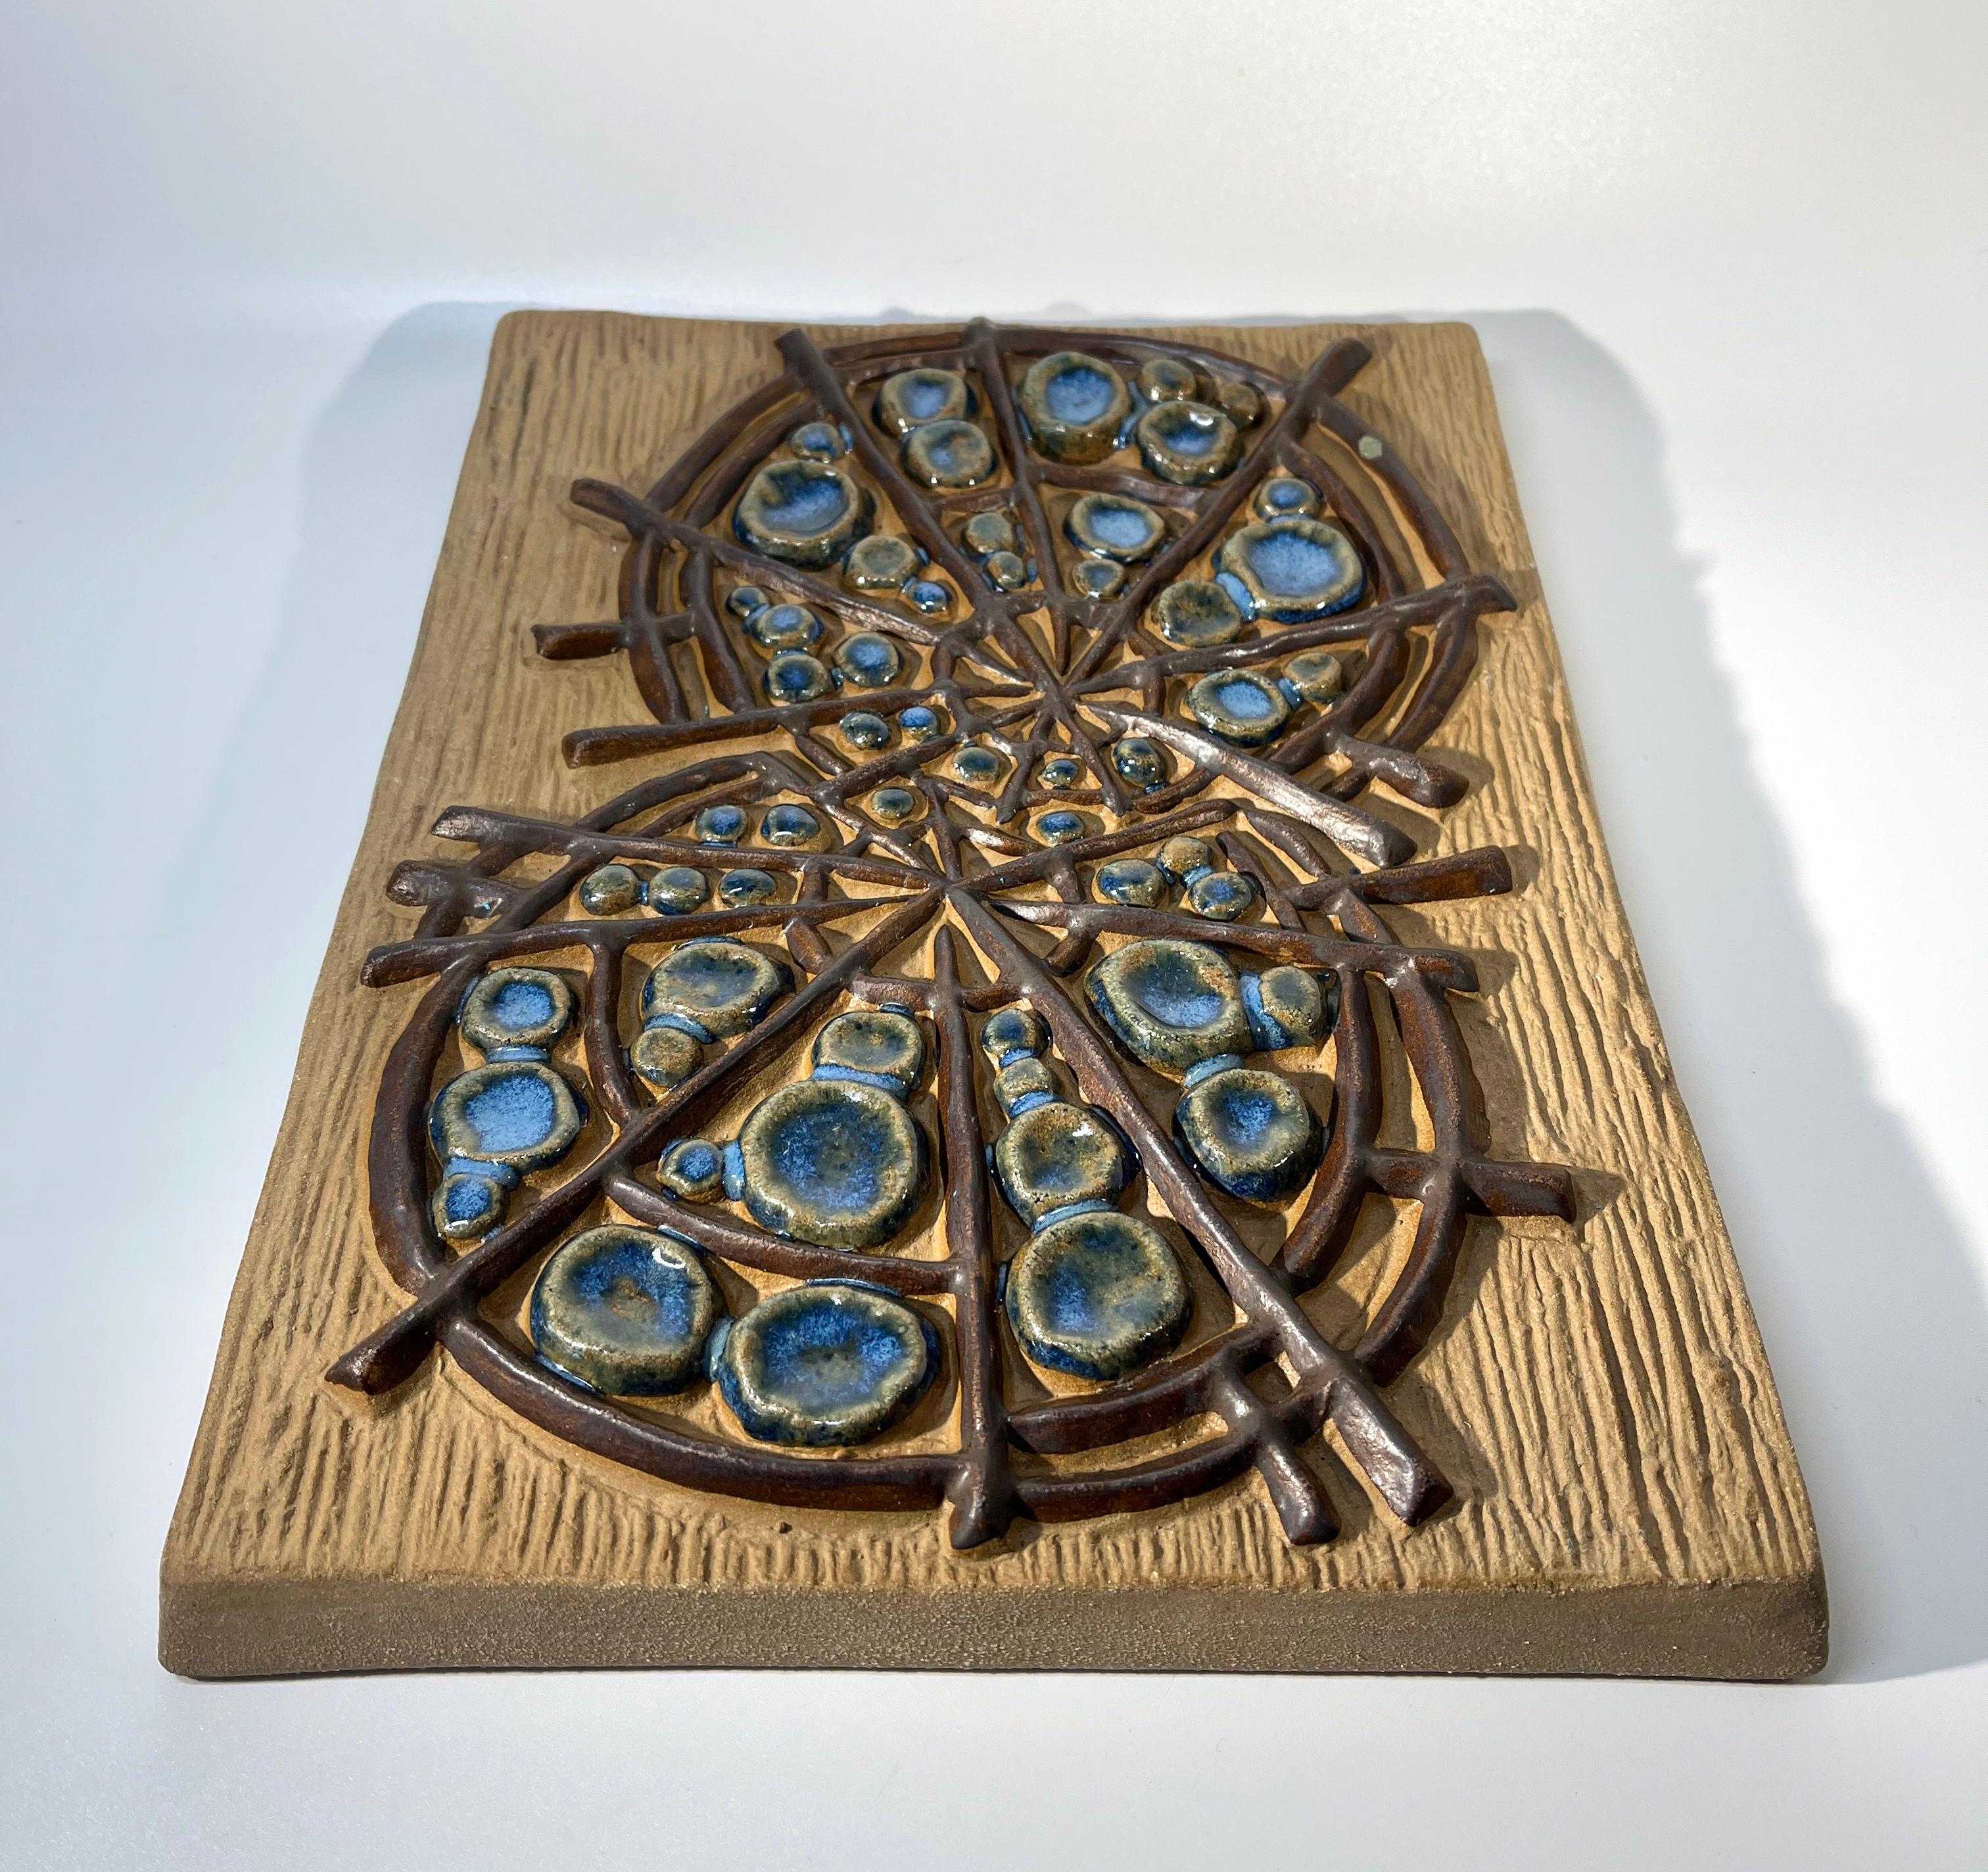 Glazed Abstract Wheels By Marianne Starck For Michael Andersen. Danish Wall Plaque For Sale